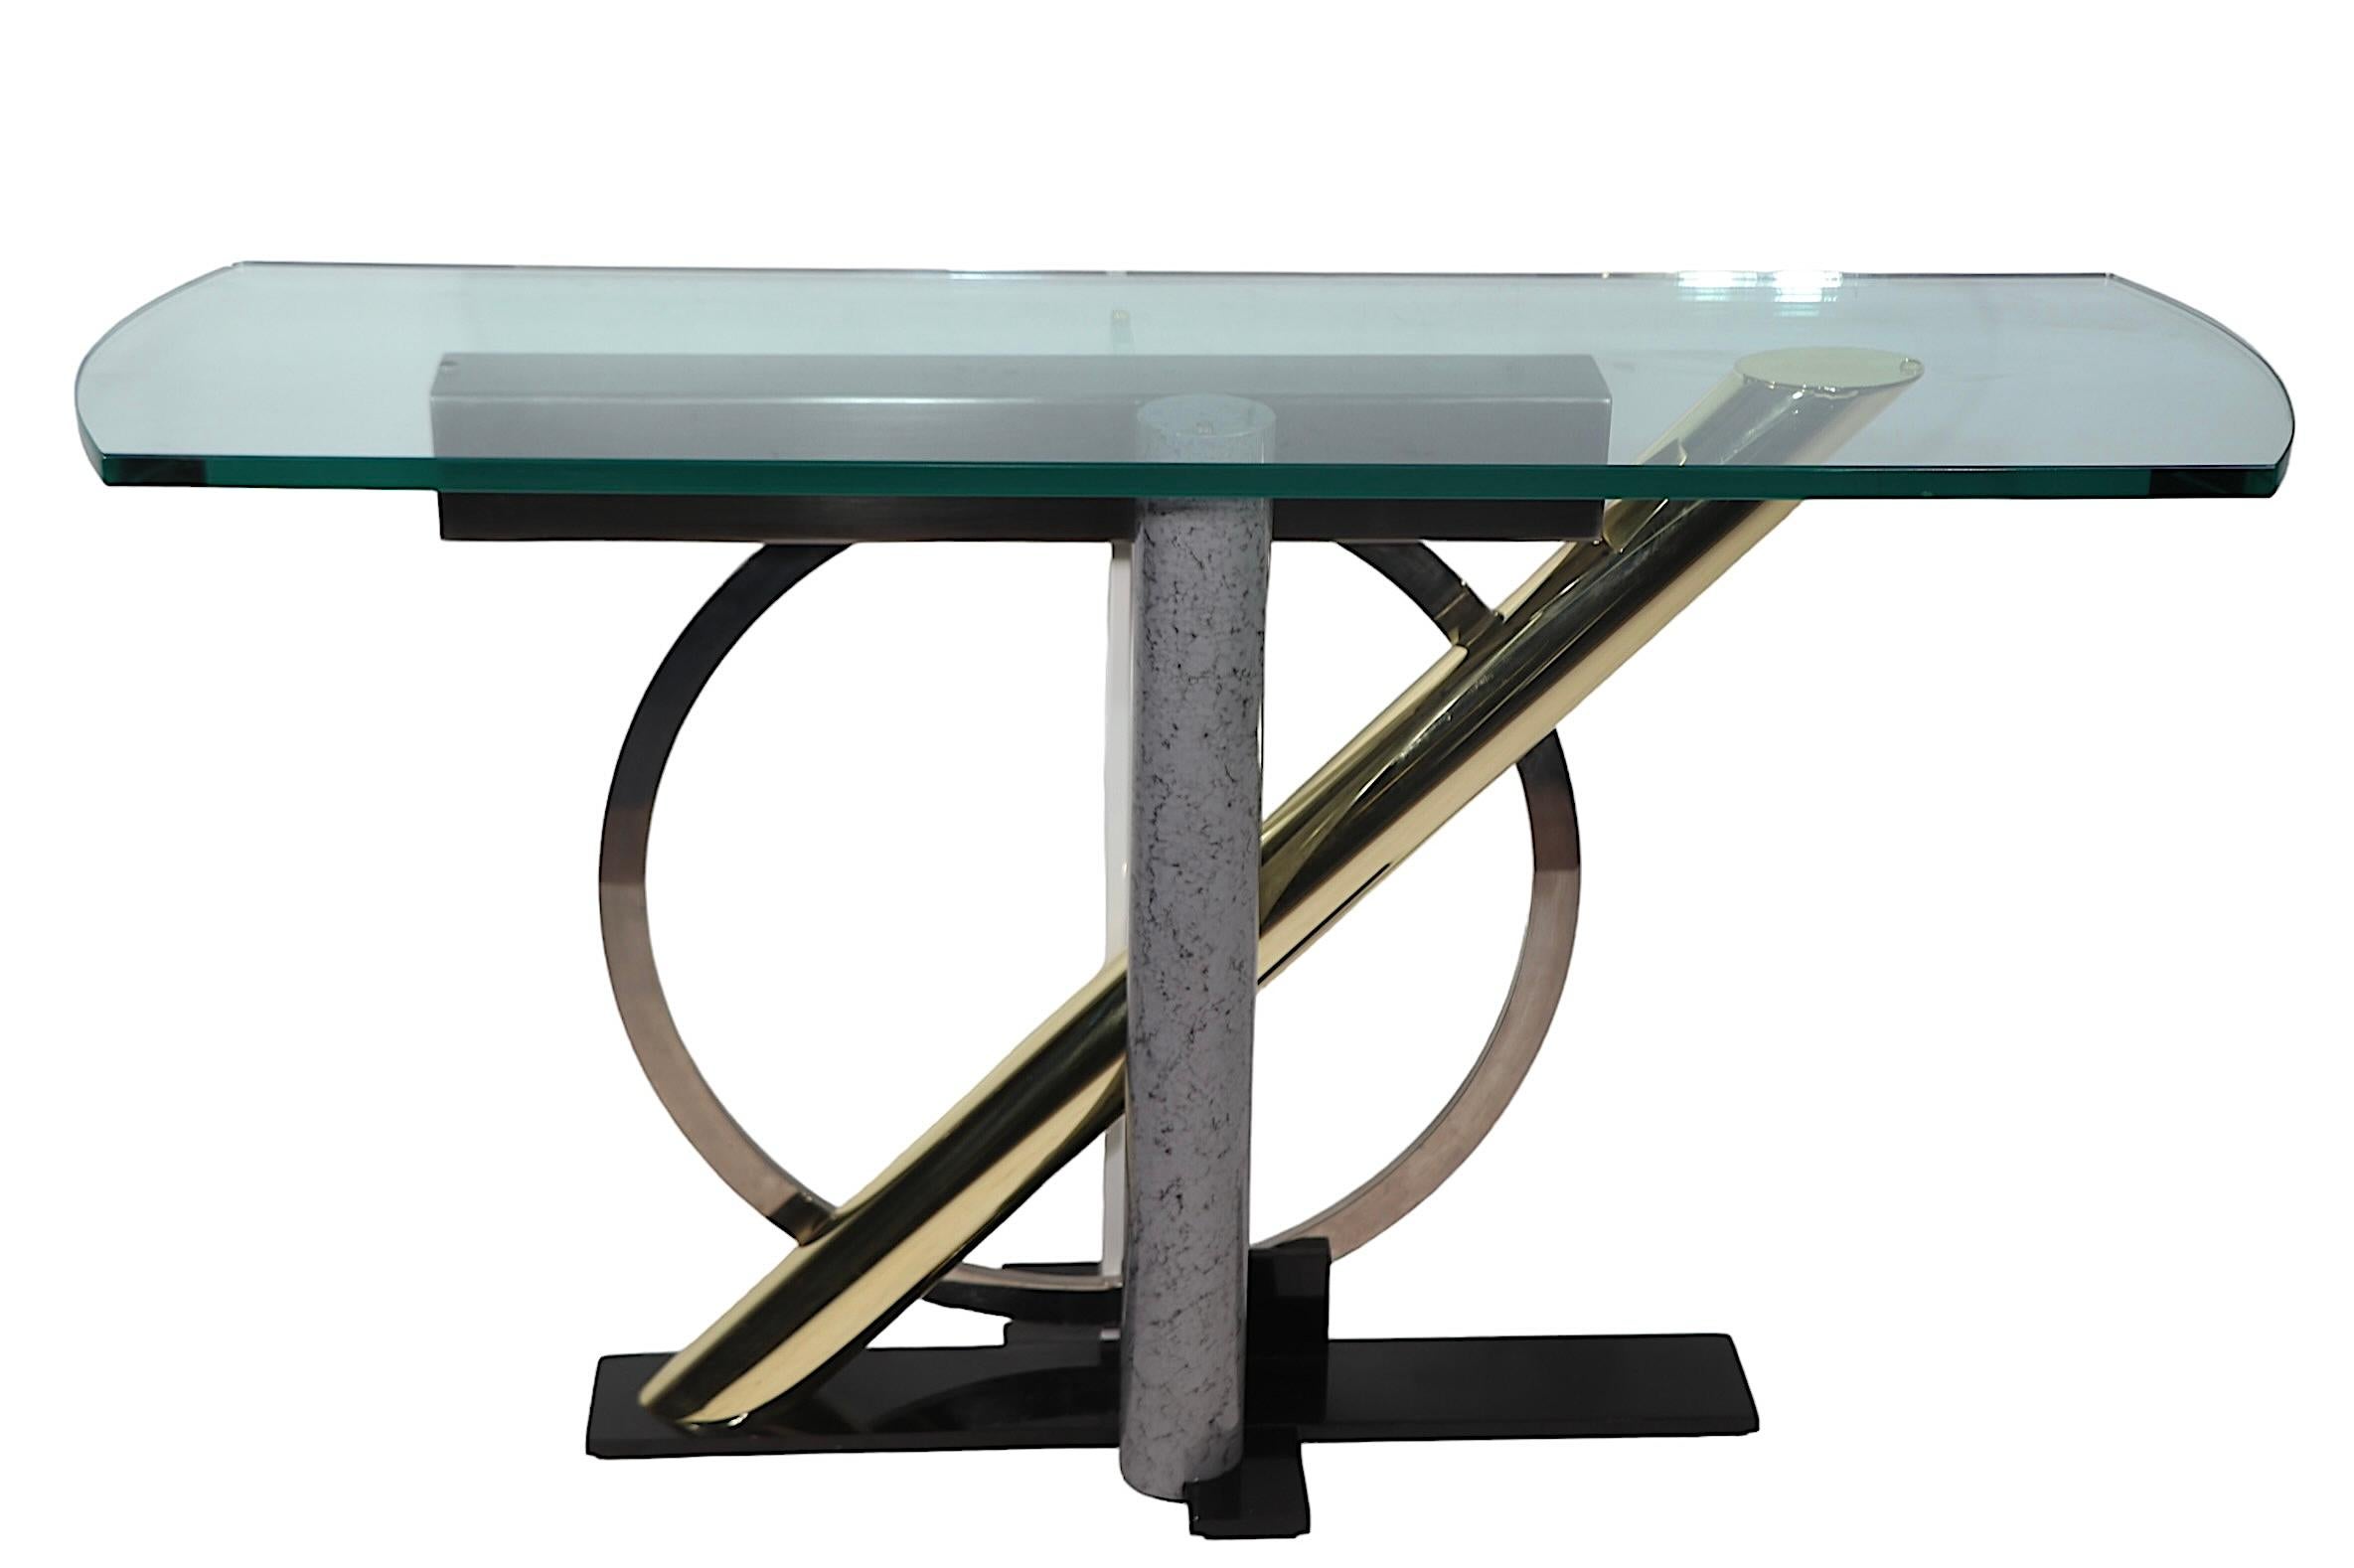 Iconic Post Modern design console table by Kaizo Oto for the Design Institute America, circa 1980's. The table features a thick shaped glass top which rests on the stylized mixed metal base. This example is in excellent, clean, original, and ready